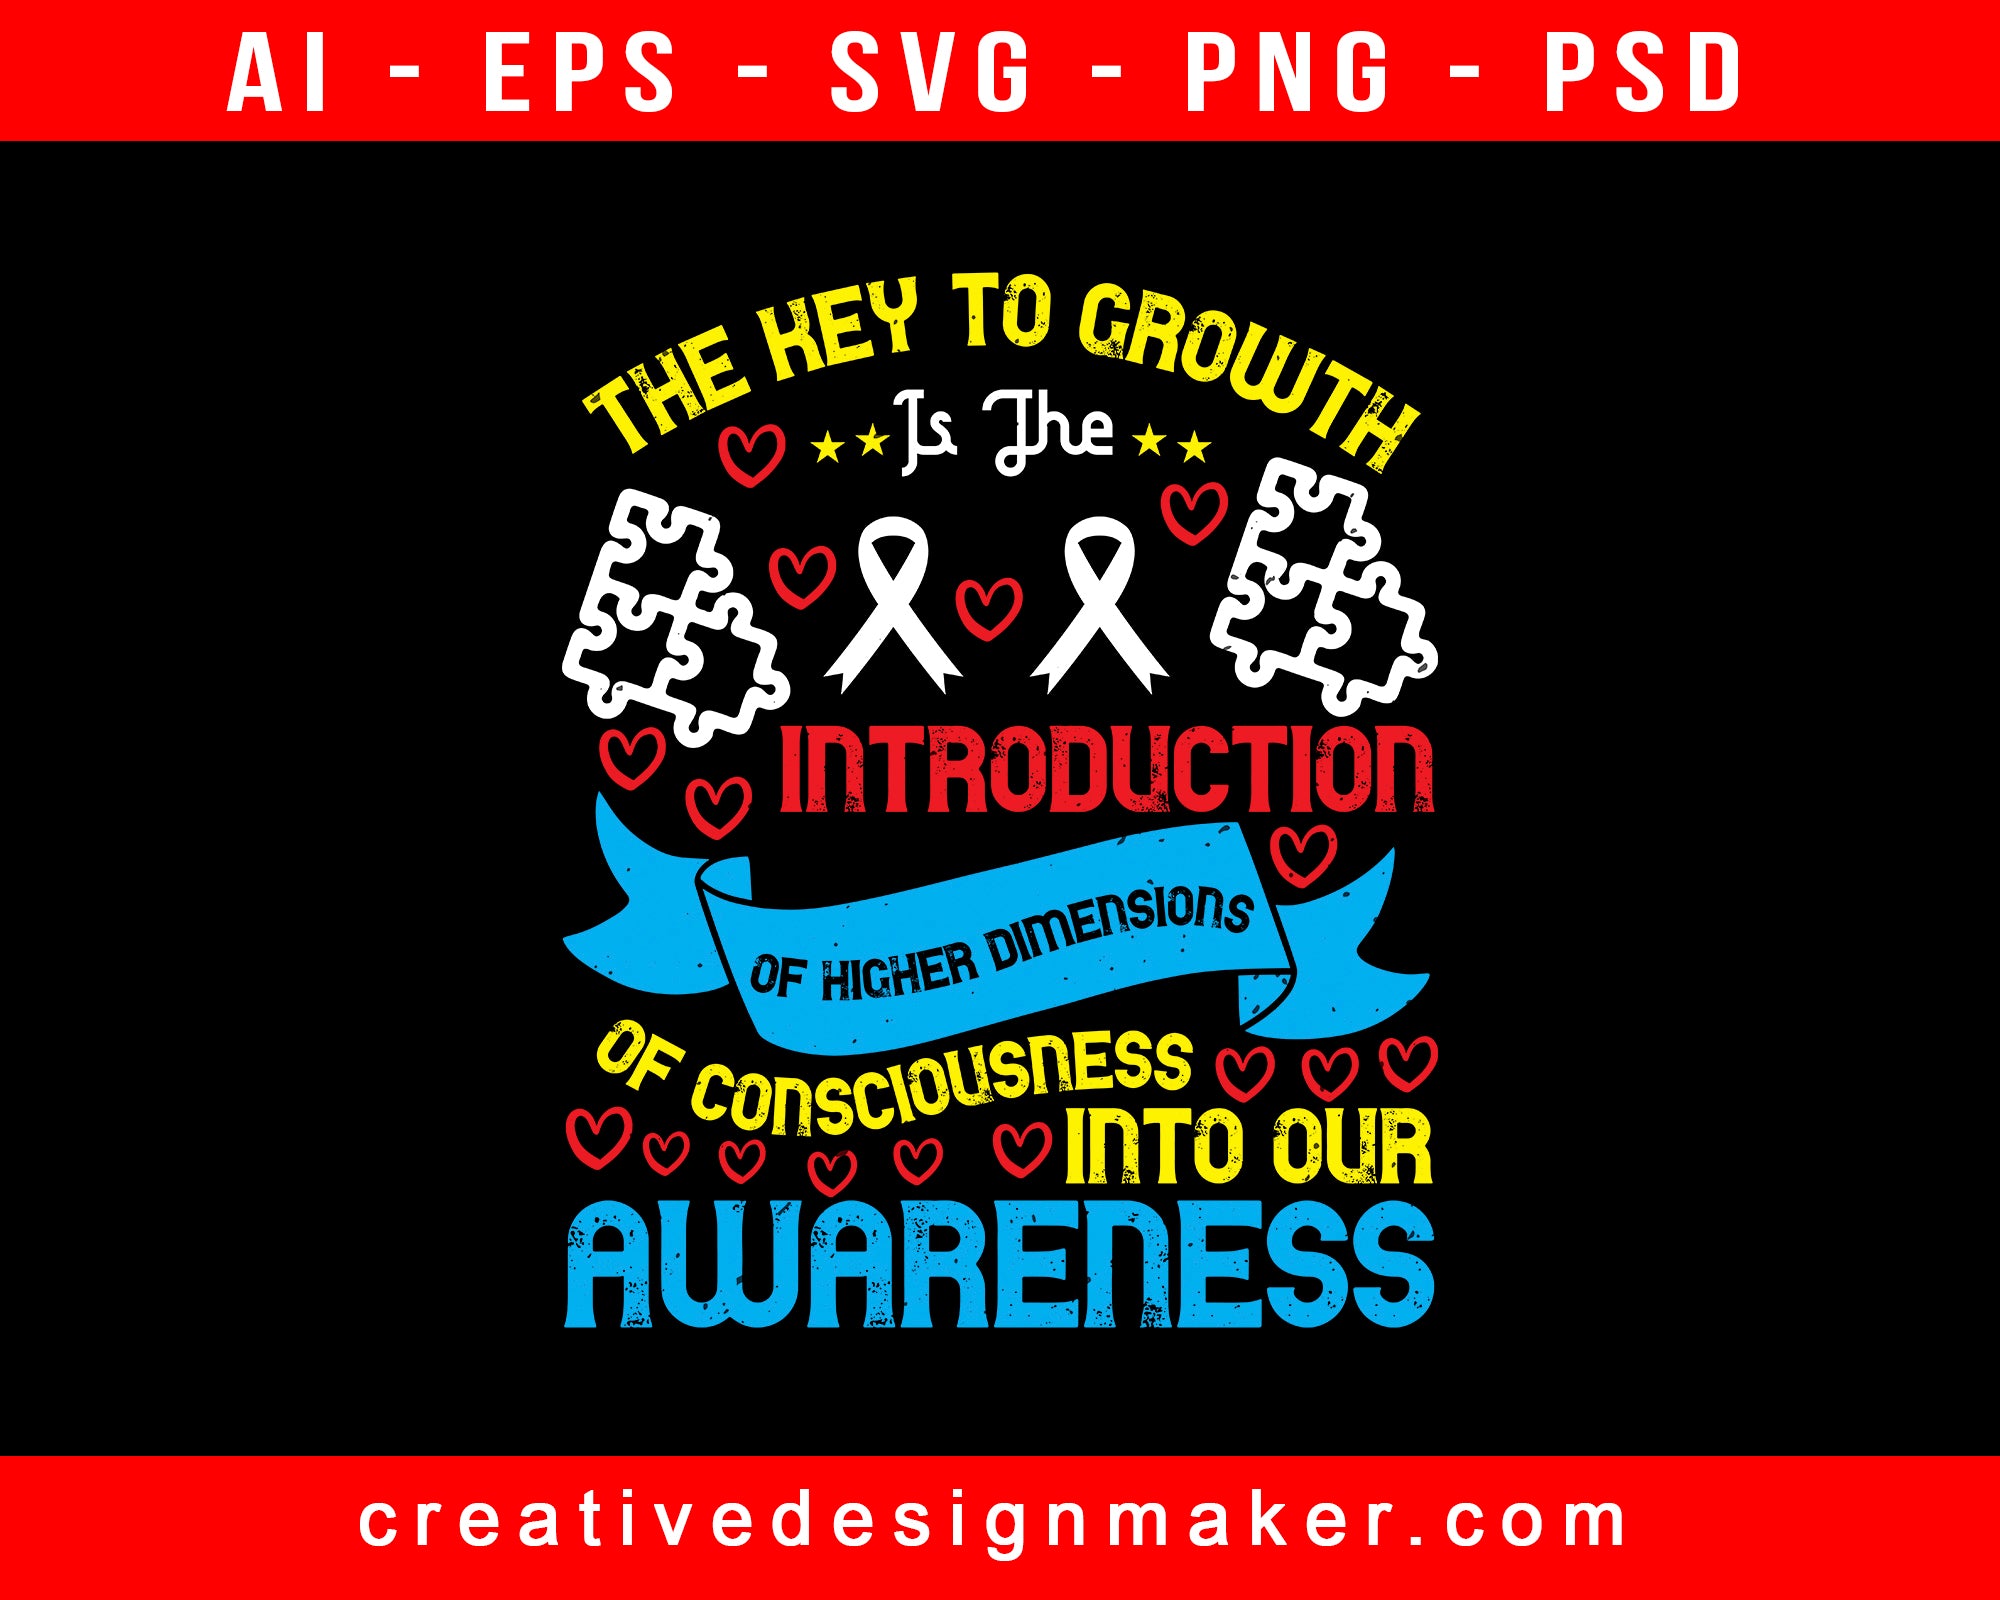 The Key To Growth Is The Introduction Of Higher Dimensions Awareness Print Ready Editable T-Shirt SVG Design!